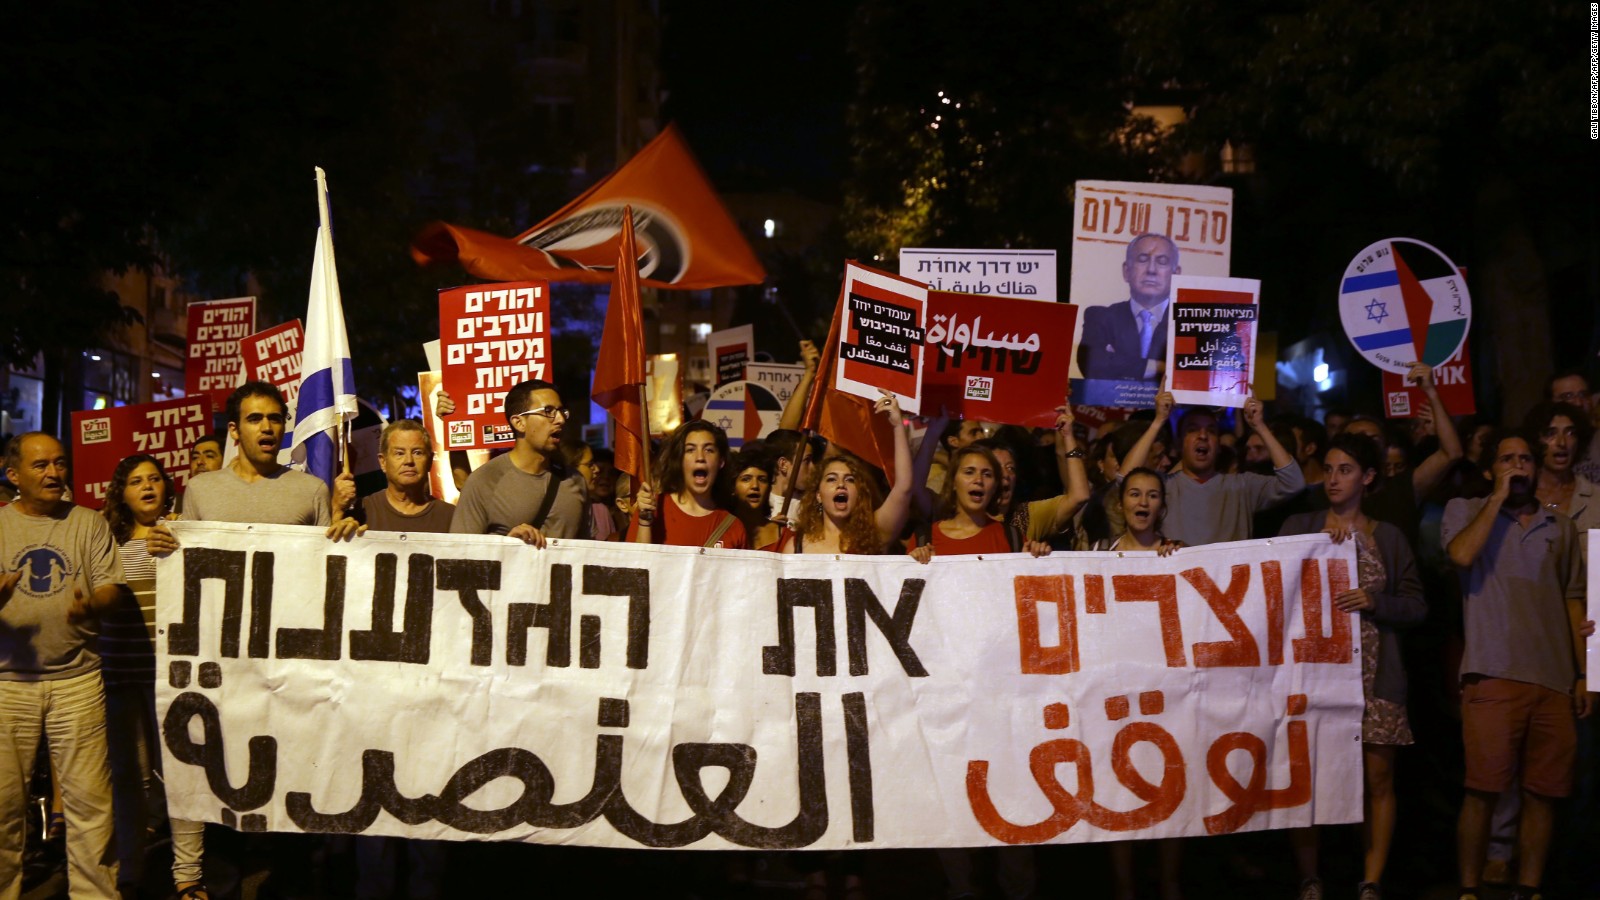 Israelis and Palestinians march for peace in Jerusalem CNN